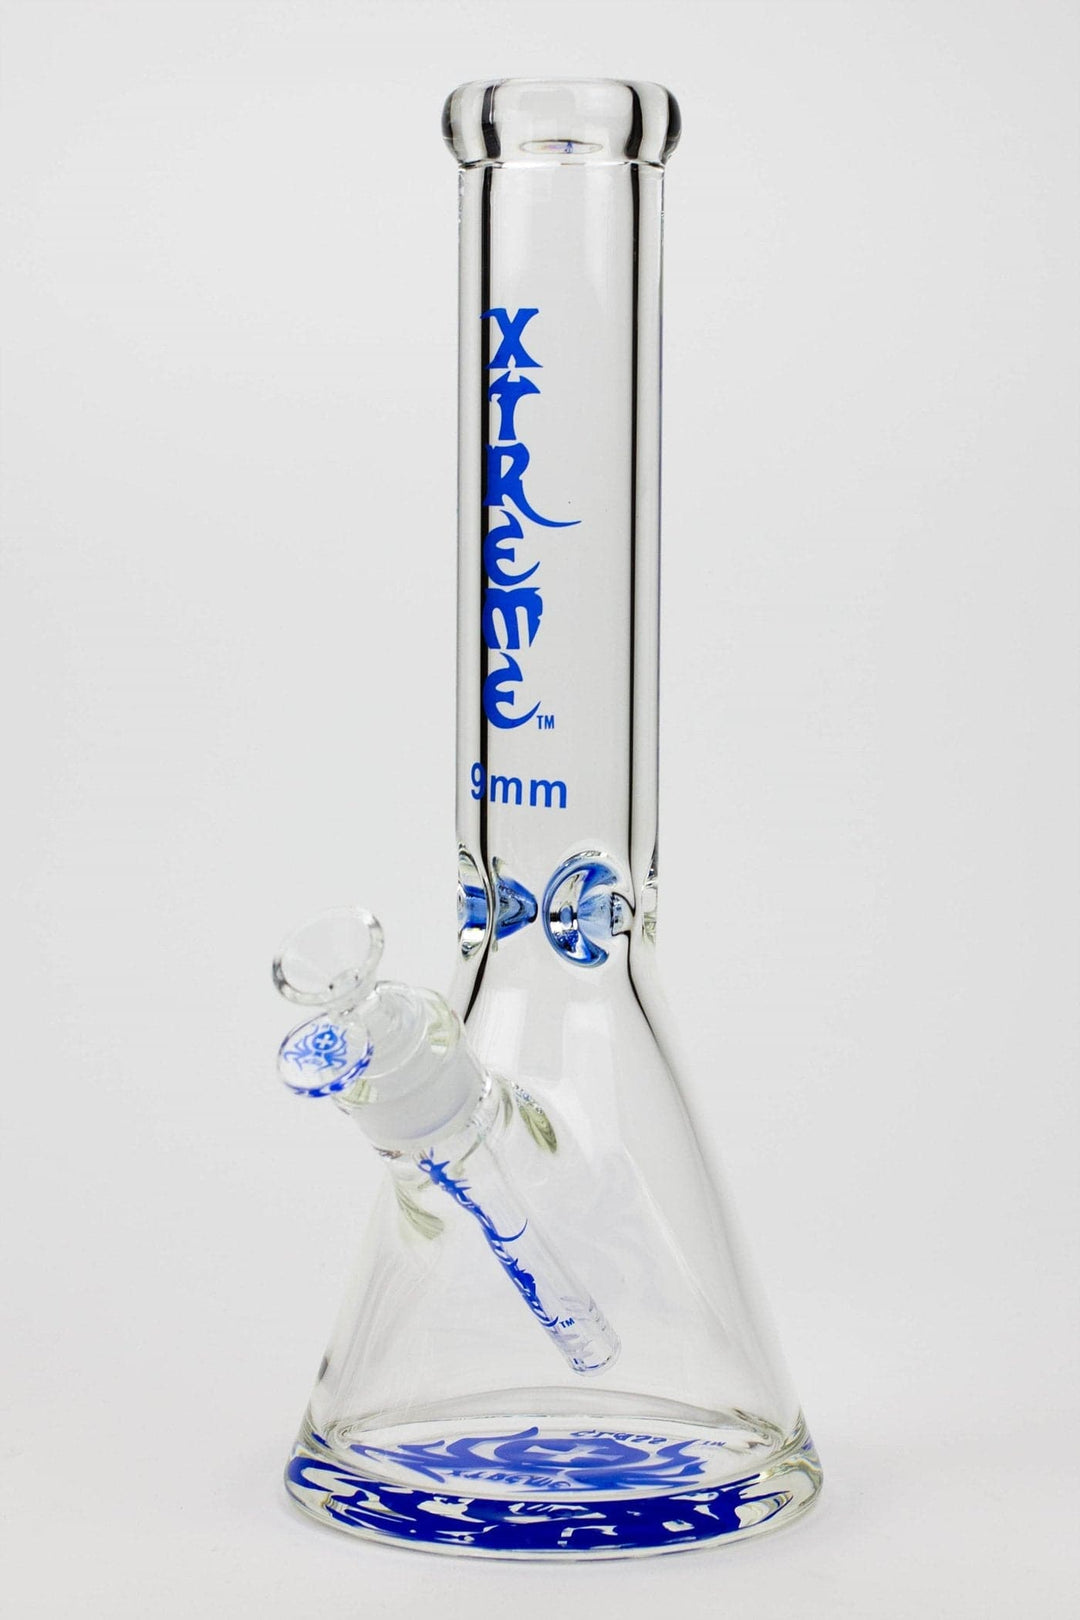 Xtreme glass classic glass beaker water pipes_11